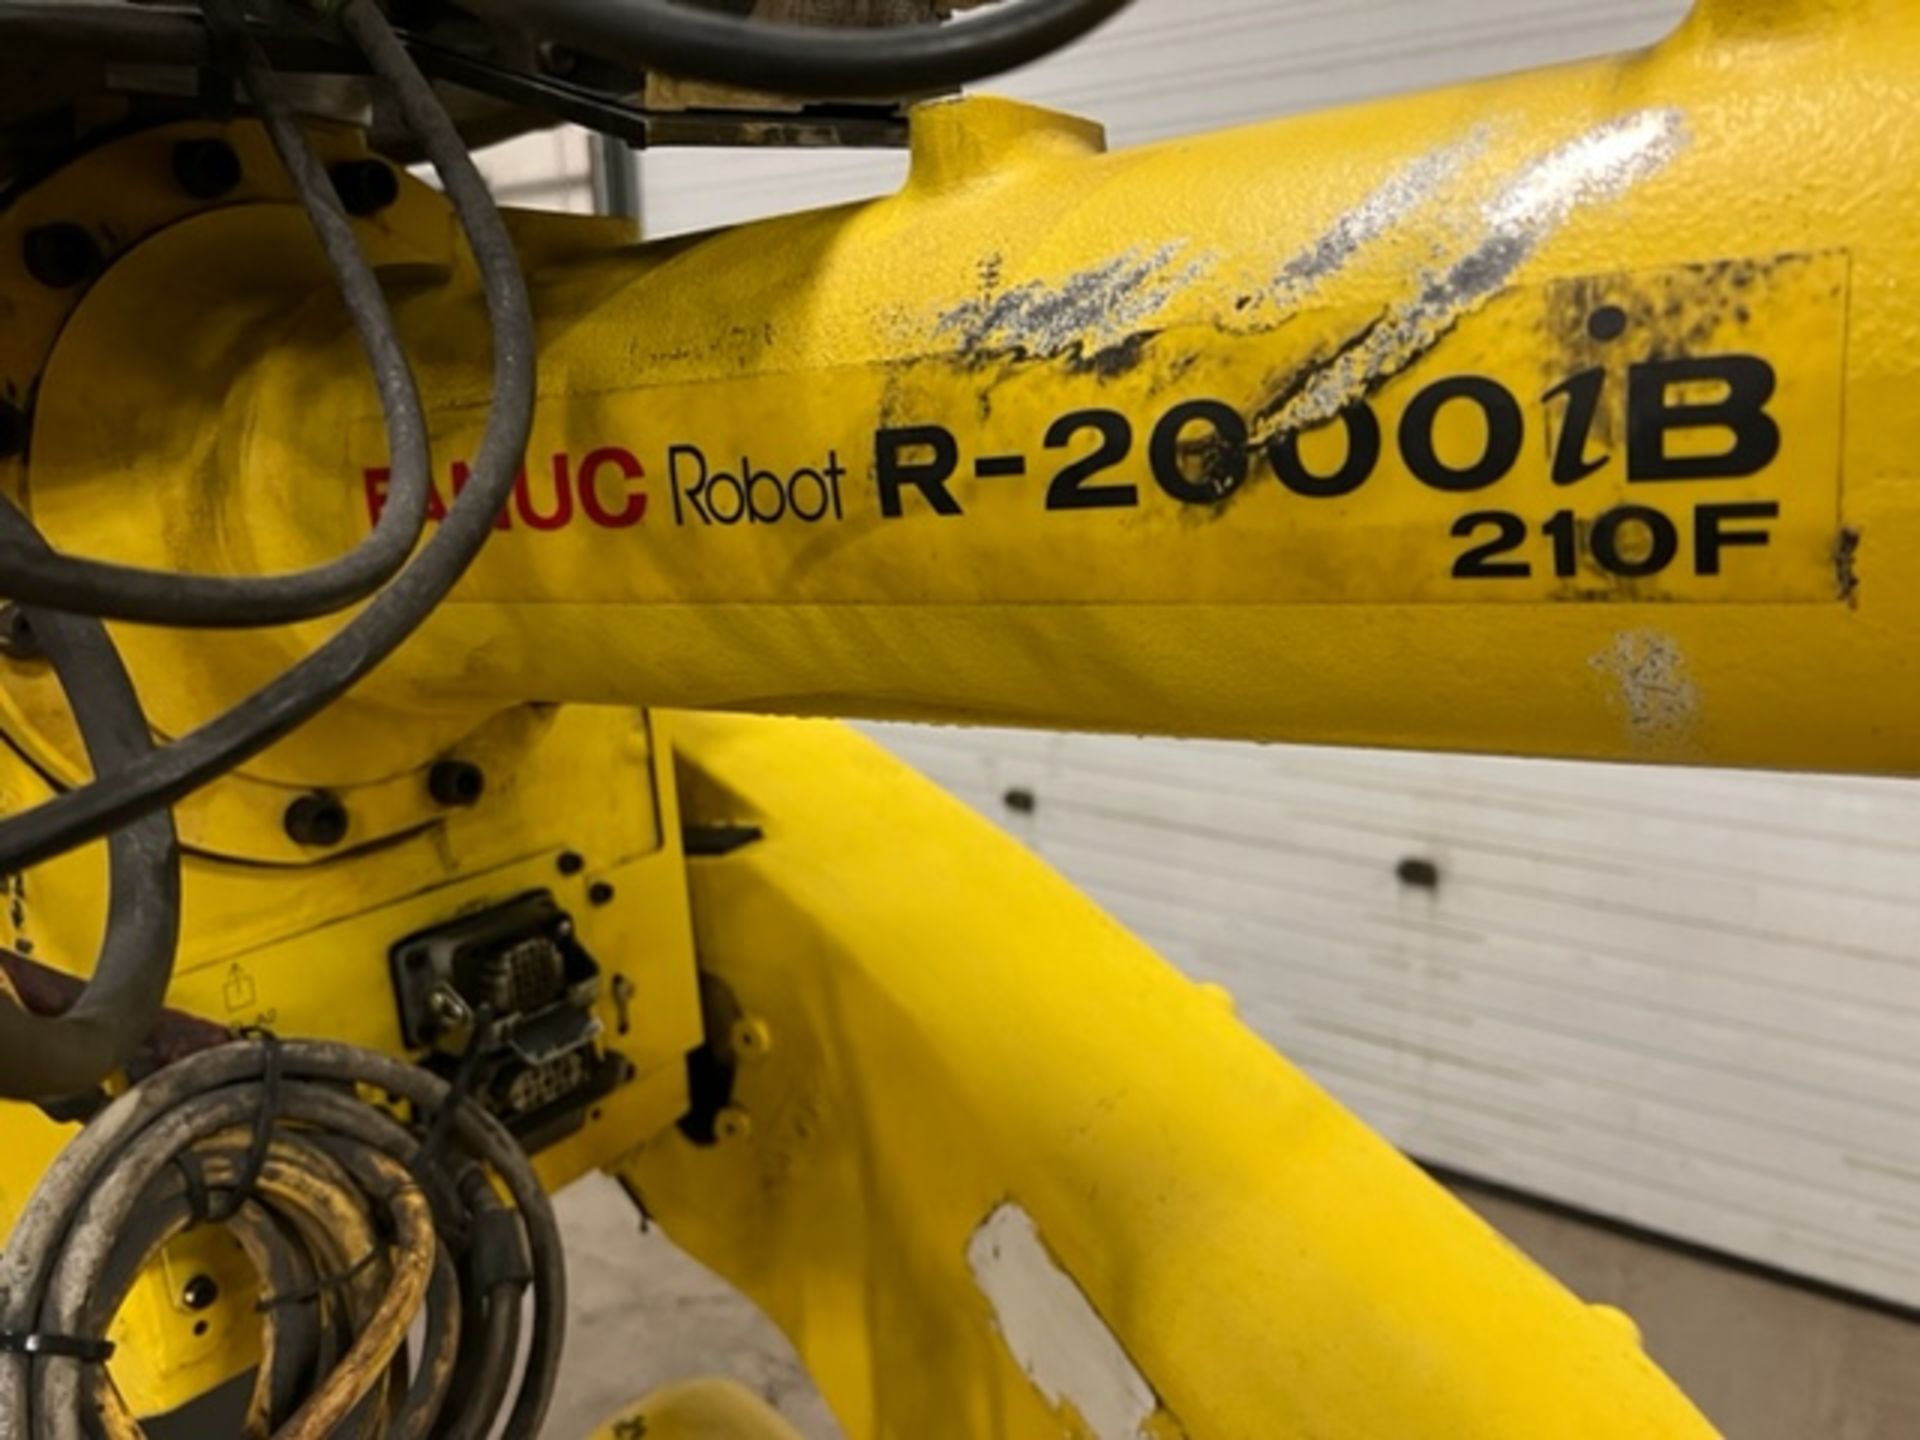 MINT 2012 Fanuc Handling Robot Model R-2000iB 210F - 210kg payload with R-30iA Controller and - Image 2 of 4